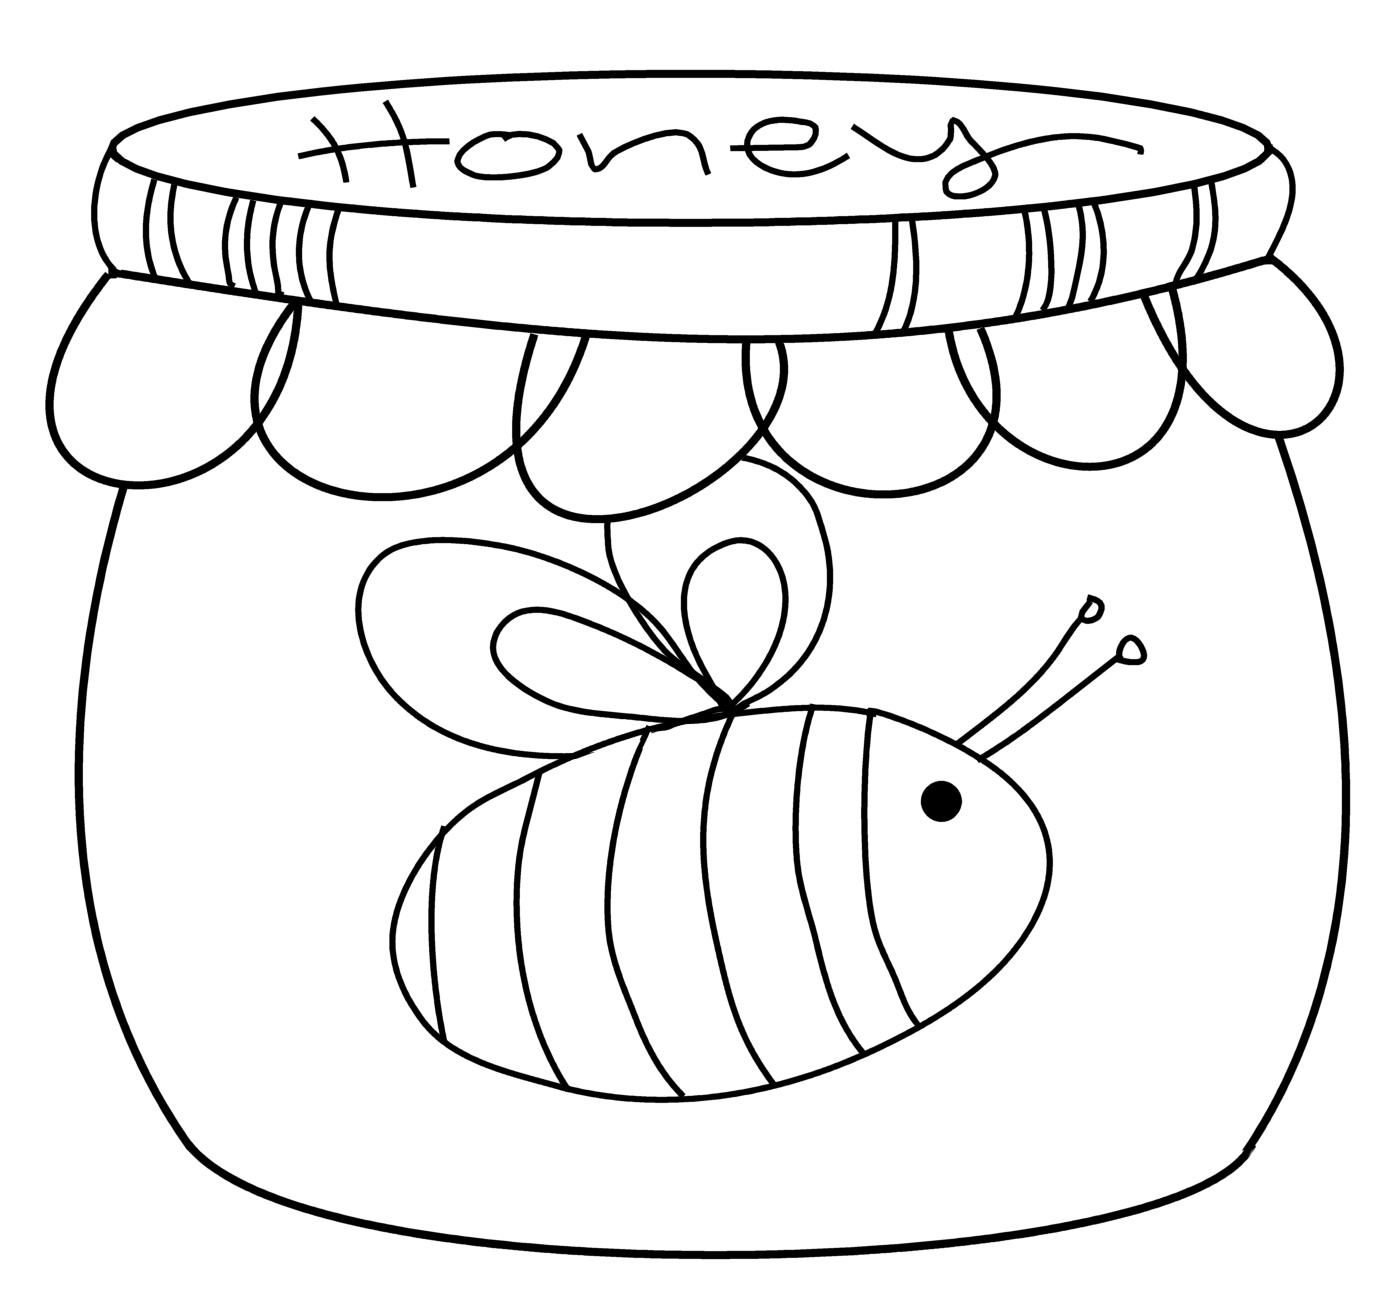 Honey Pot Coloring Page at GetDrawings Free download